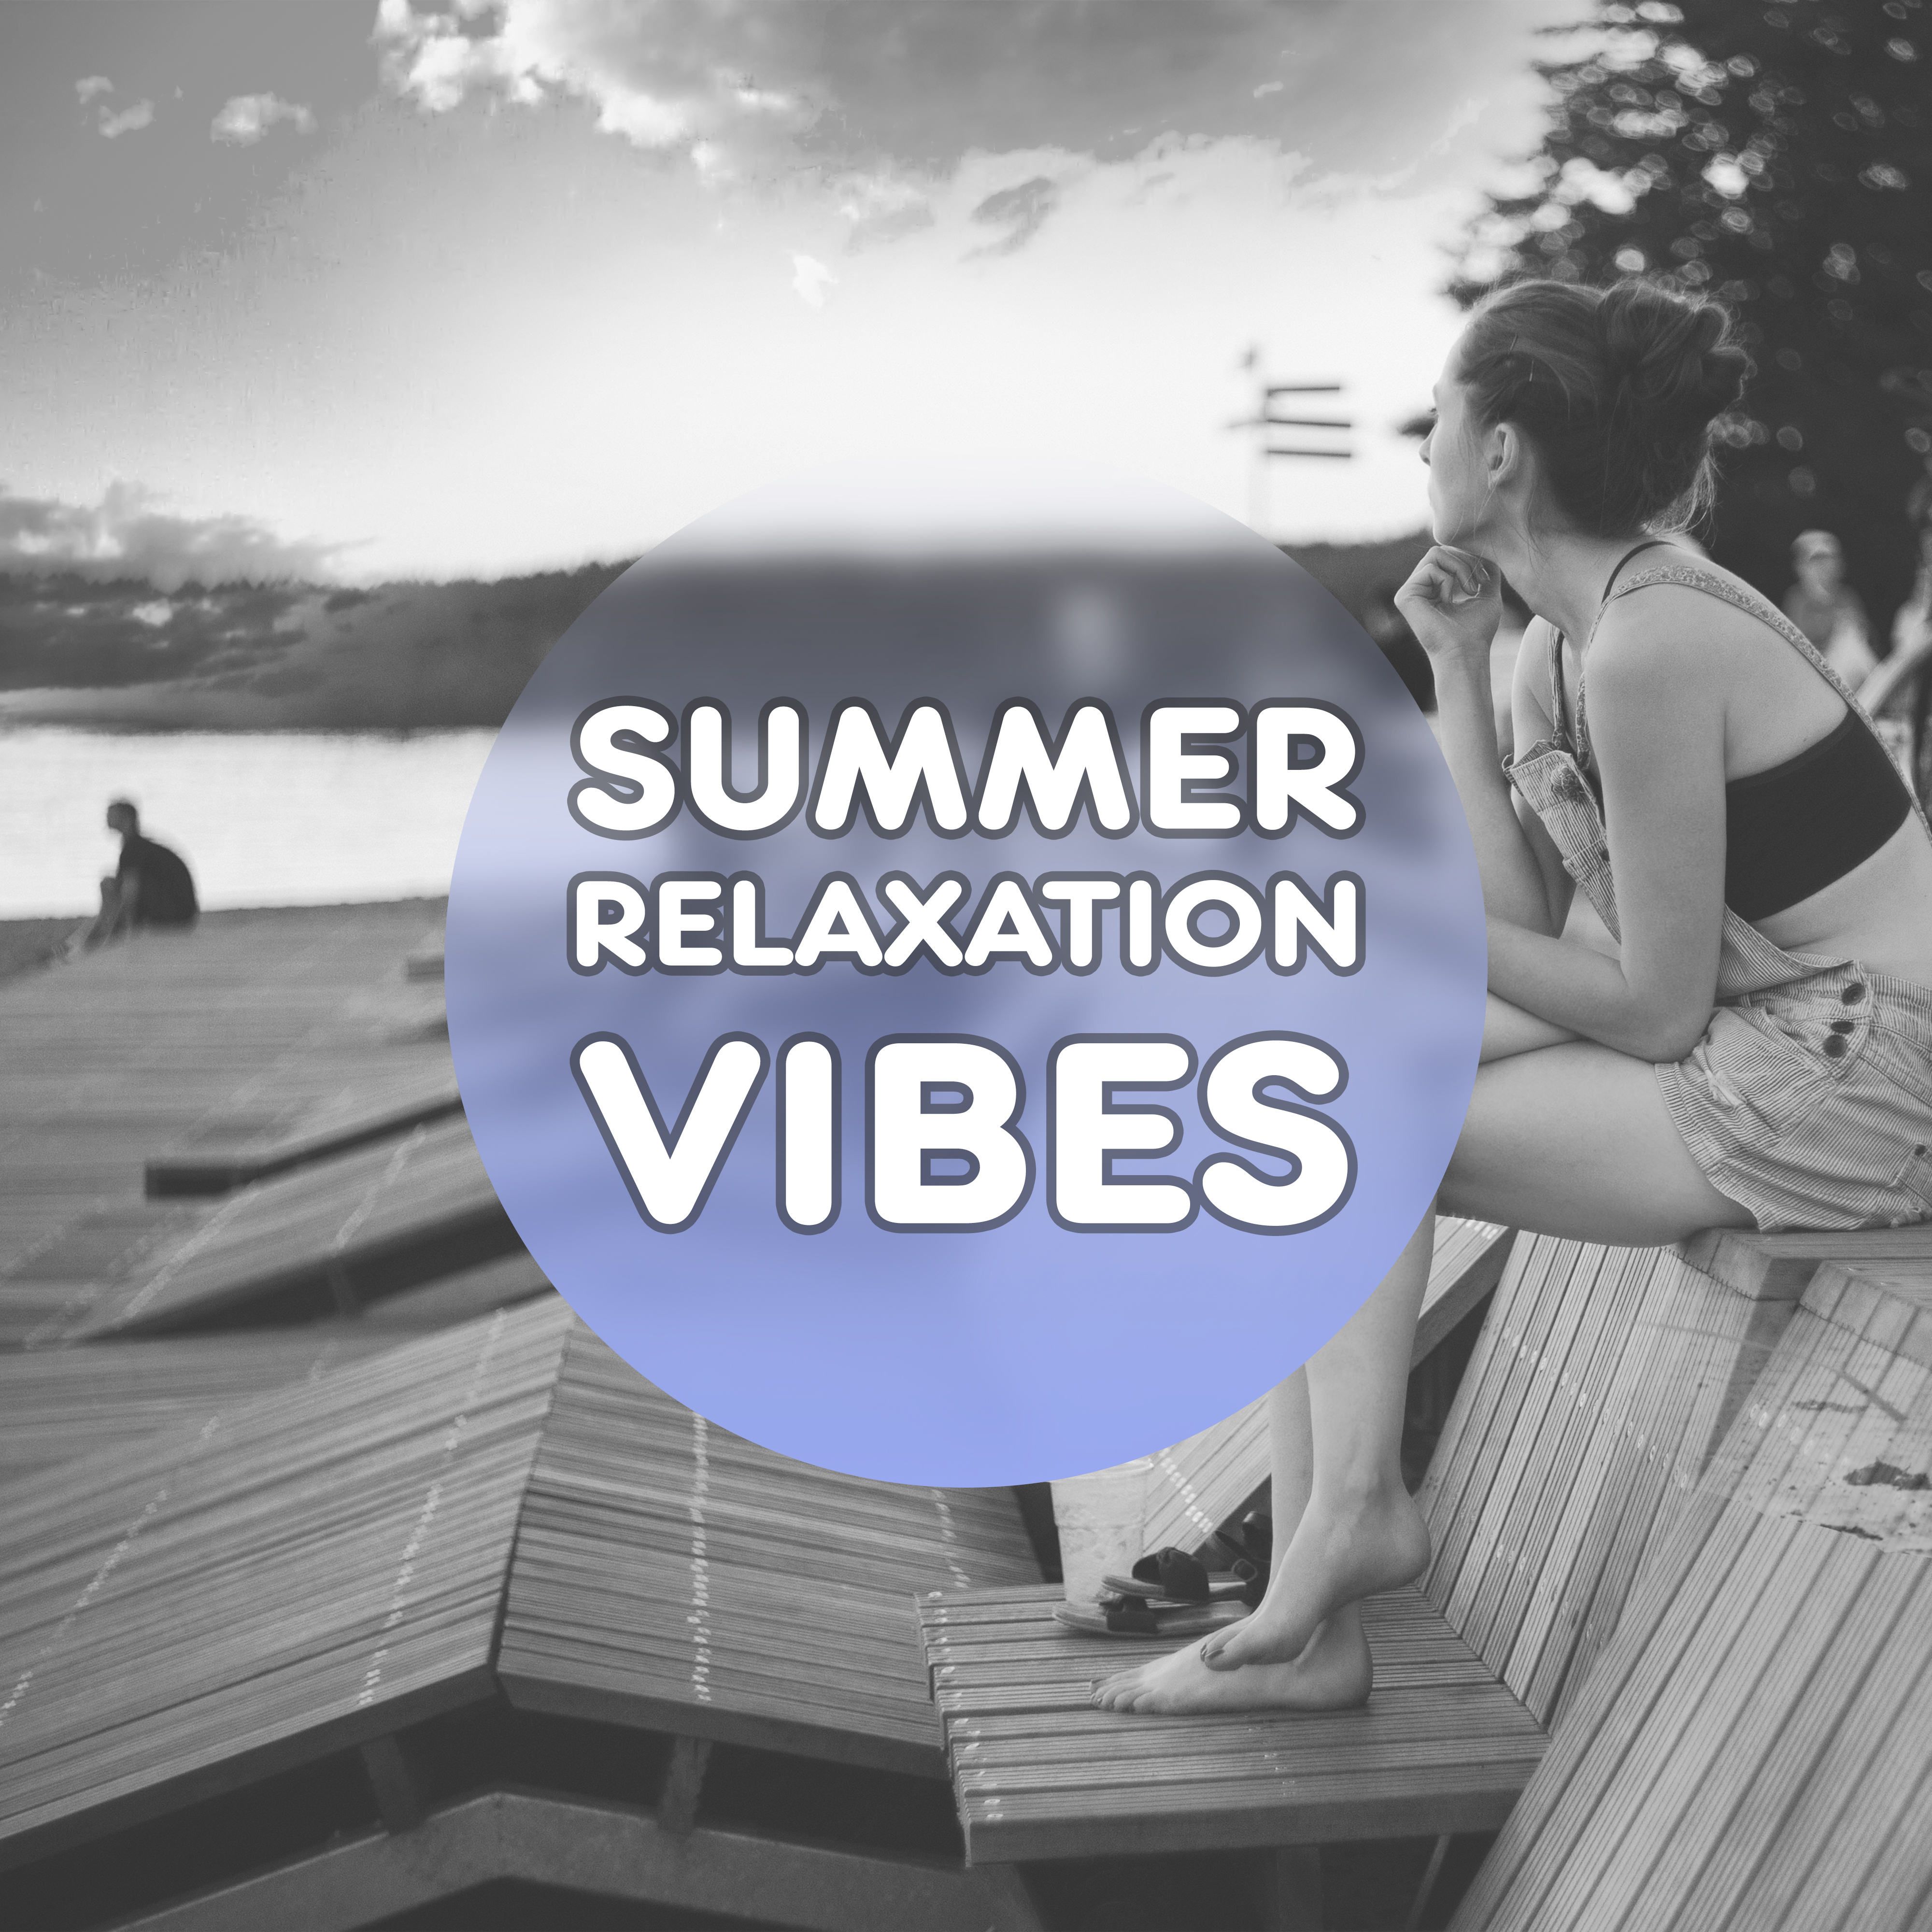 Summer Relaxation Vibes  Beach Relaxation, Tropical Island Music, Chill Out Beats 2017, Easy Way to Relax